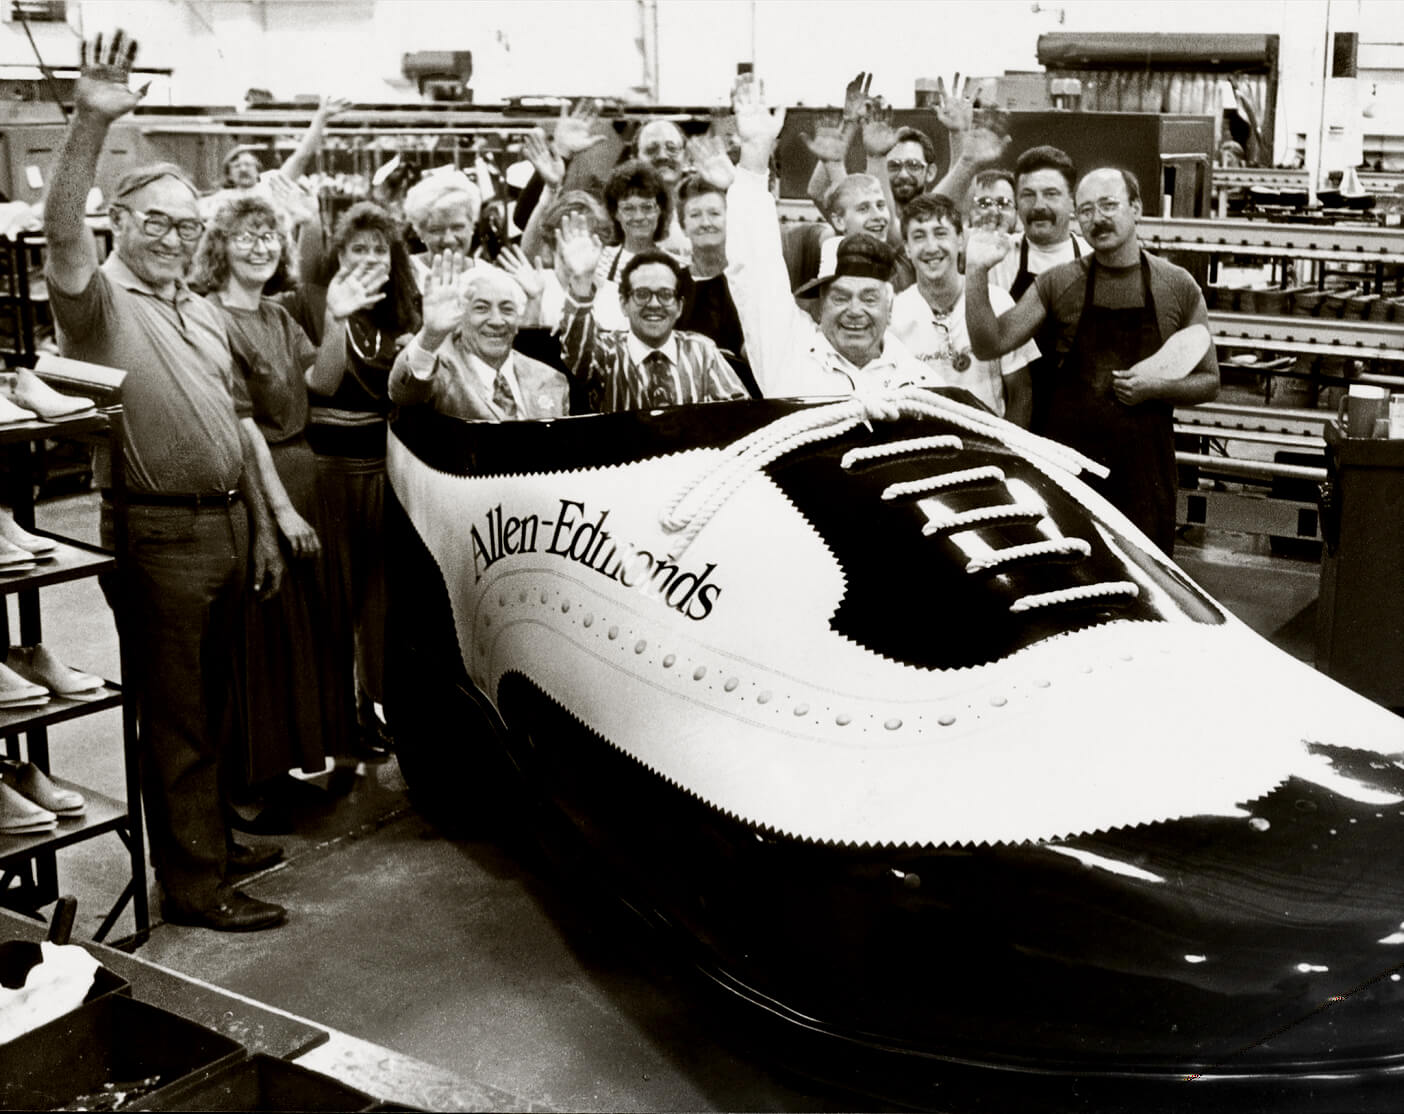 The team in Port Washington with entertainer Ernest Borgnine behind the wheel of the Wingtripper, a giant, drivable shoe that was used for local parades and events in the Milwaukee area.